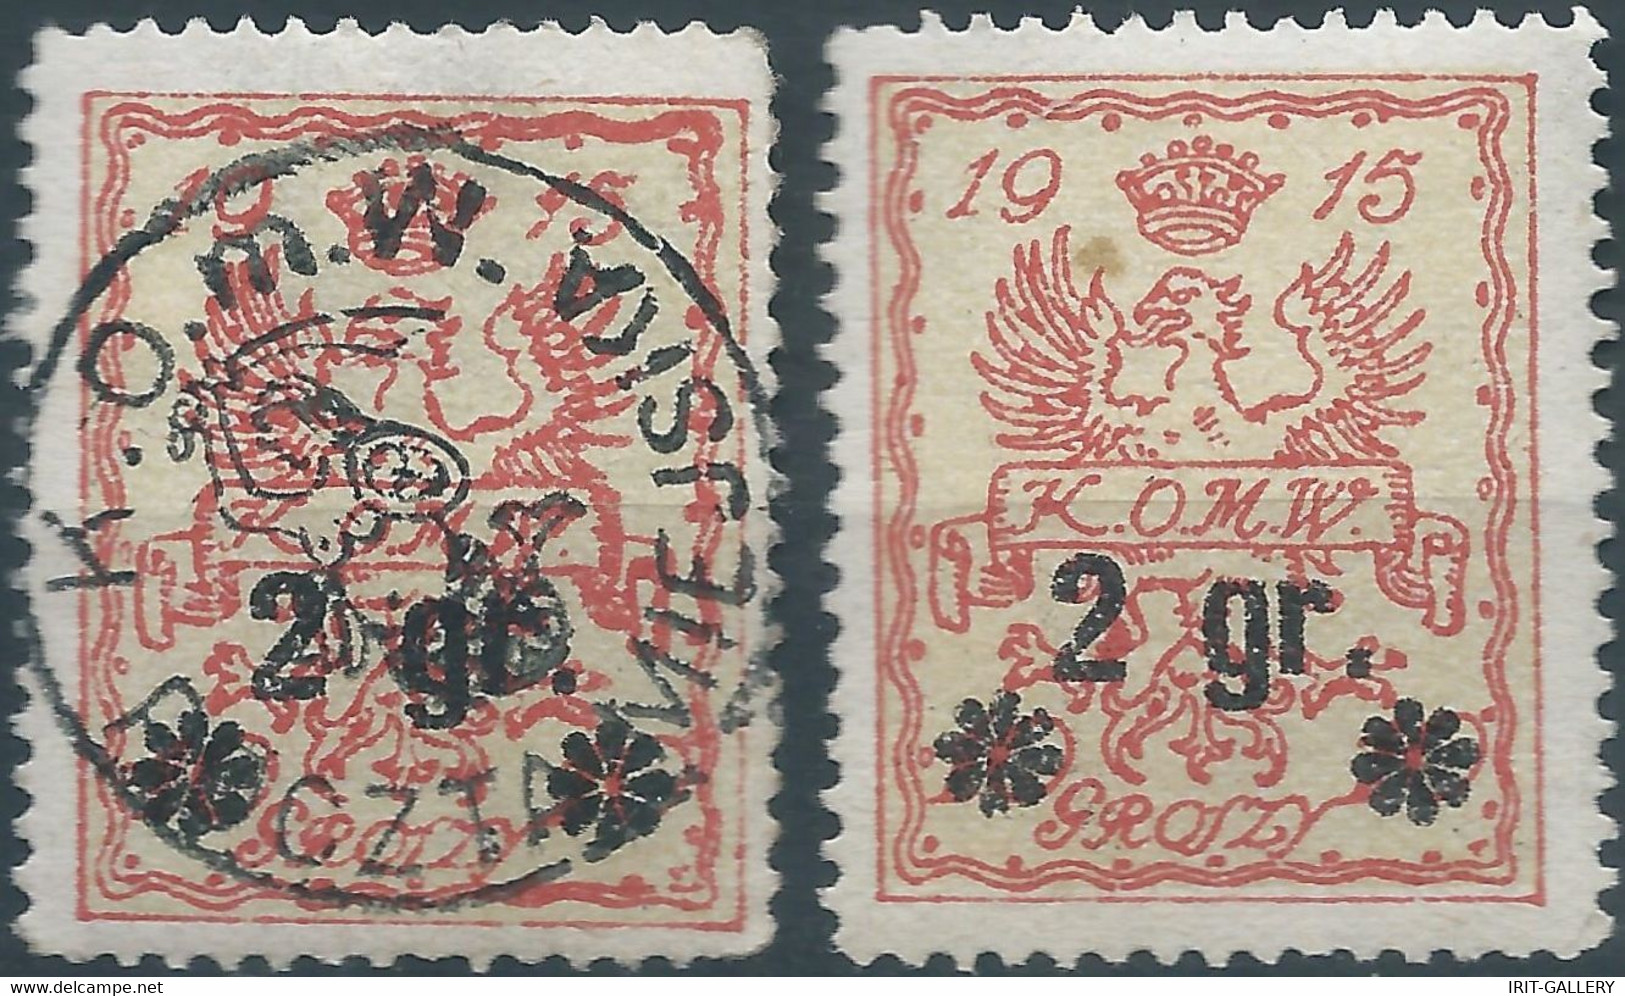 POLONIA-POLAND-POLSKA,1915 Warsaw Local Issues,10 GROSZY/ 2 GR,Obliterated And Mint - Neufs